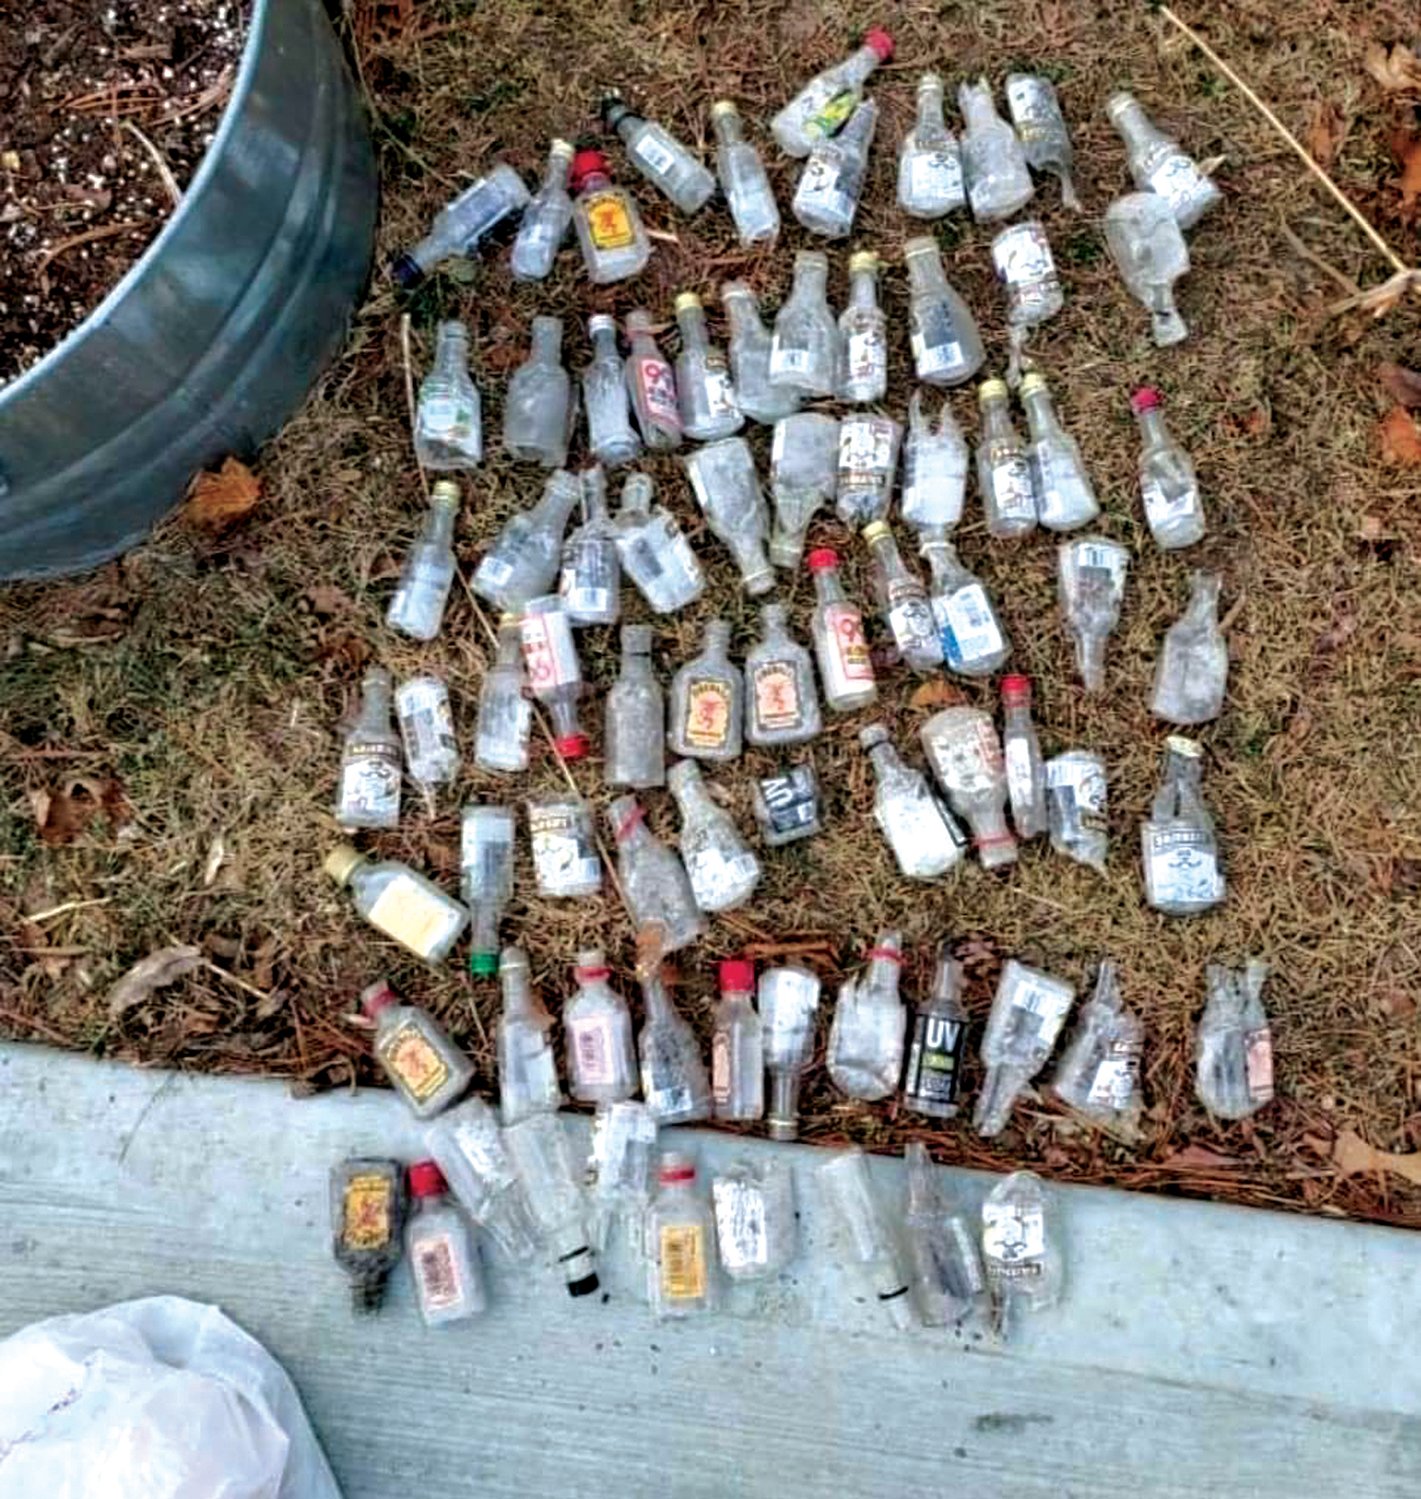 NIP HUNT: Recently the Pick Up Warwick Group helped to pick up 1,517 miniature alcohol bottles known as nips across Warwick in 11 days. The group decided to focus on picking up nips during the time period after Rep. David Bennett introduced legislation that would ban them in Rhode Island.